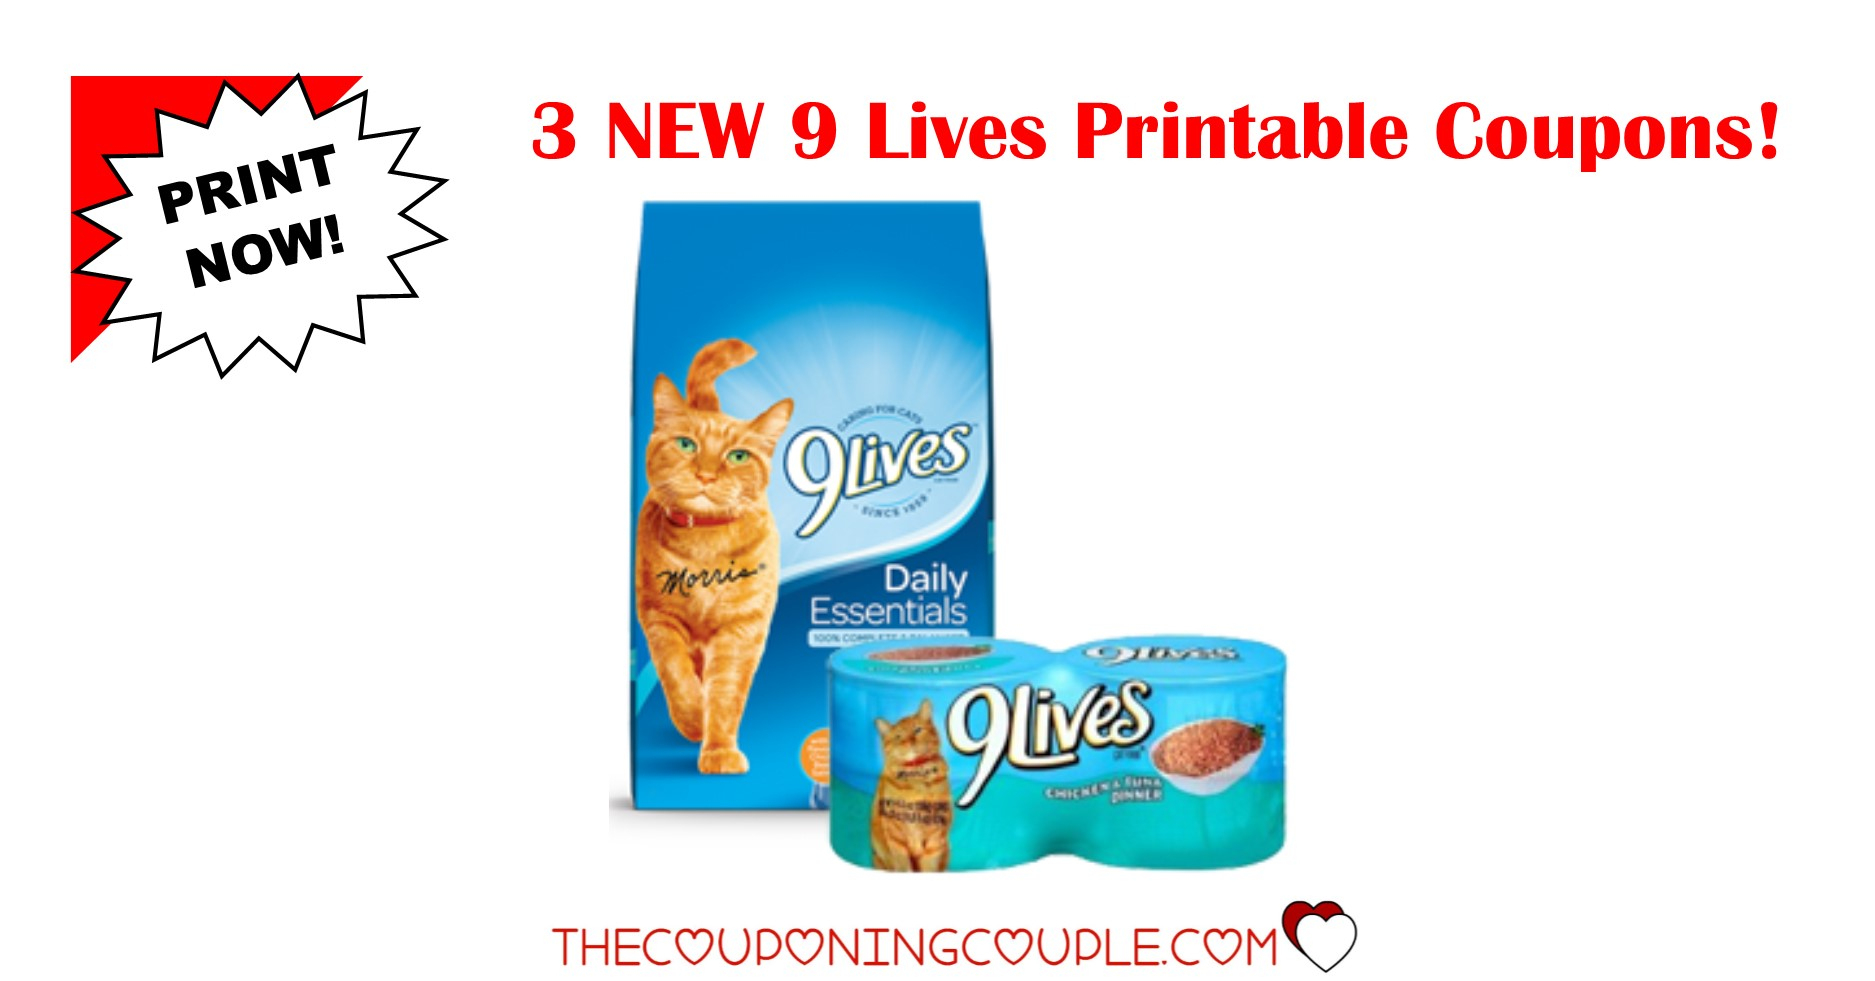 3 New 9 Lives Printable Coupons ~ Print Now! - Free Printable 9 Lives Cat Food Coupons